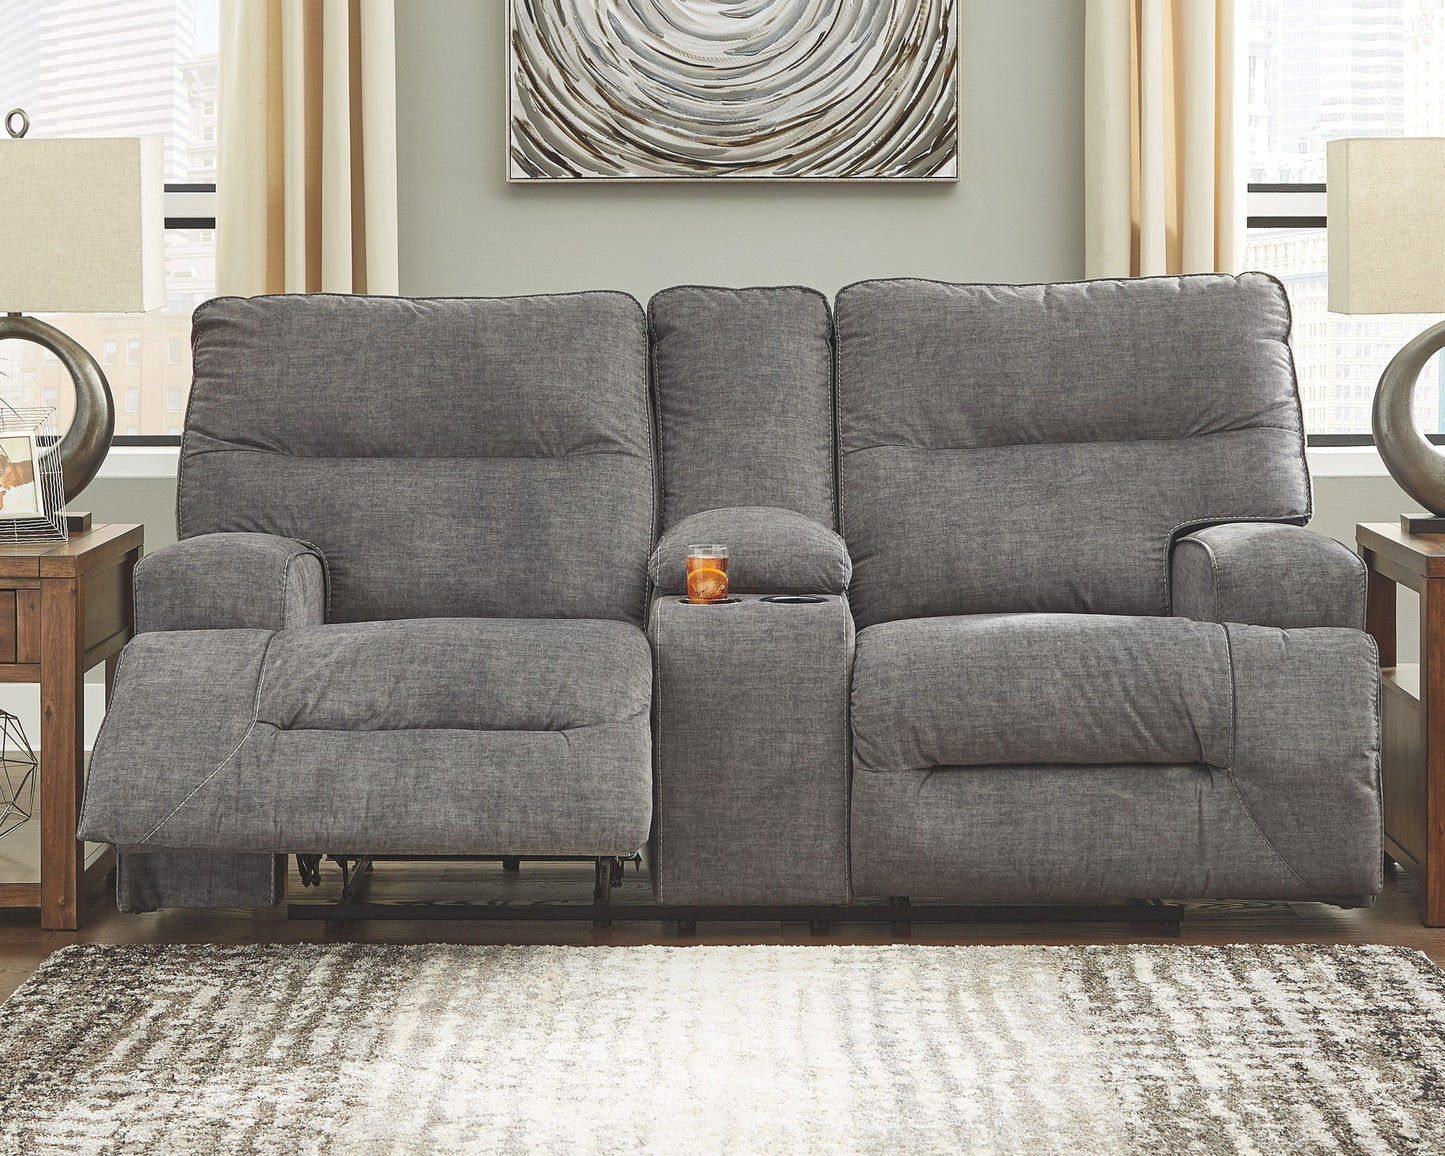 Coombs - Reclining Living Room Set